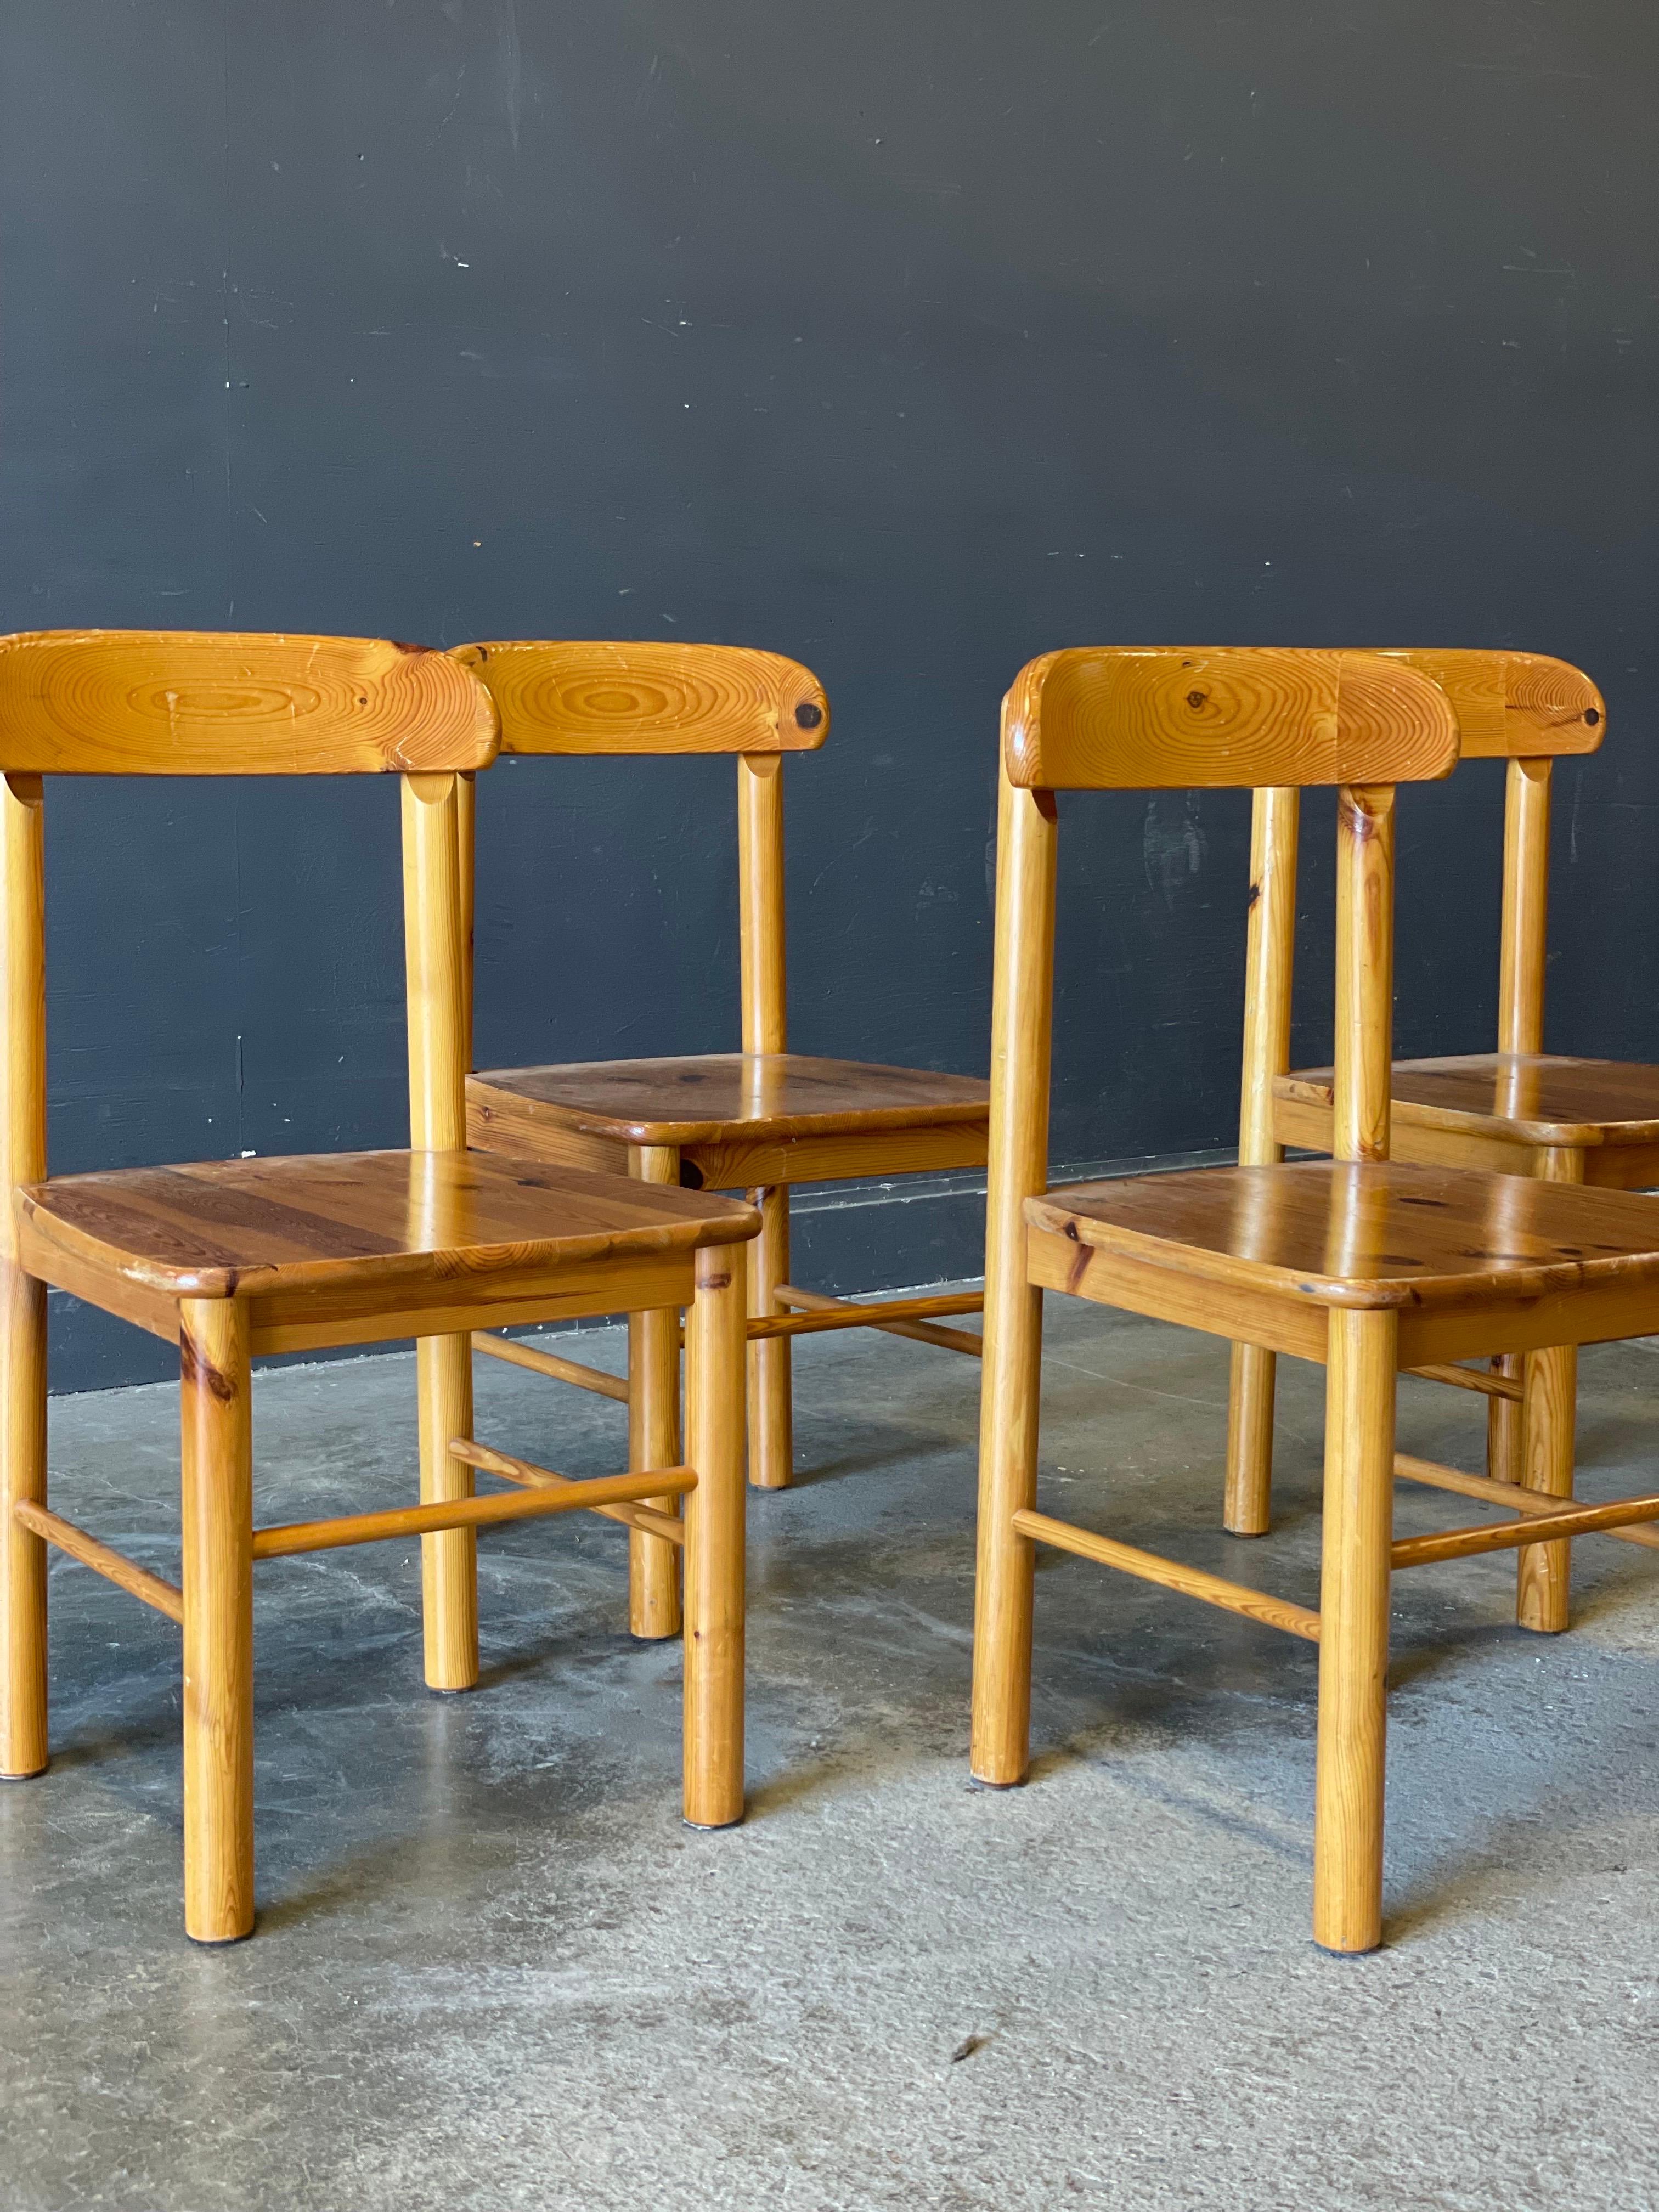 A superb set of four pine side chairs by designer Rainer Daumiller. The chairs embody his design principles; solid construction, simple in form, and rich in sculptural expression.